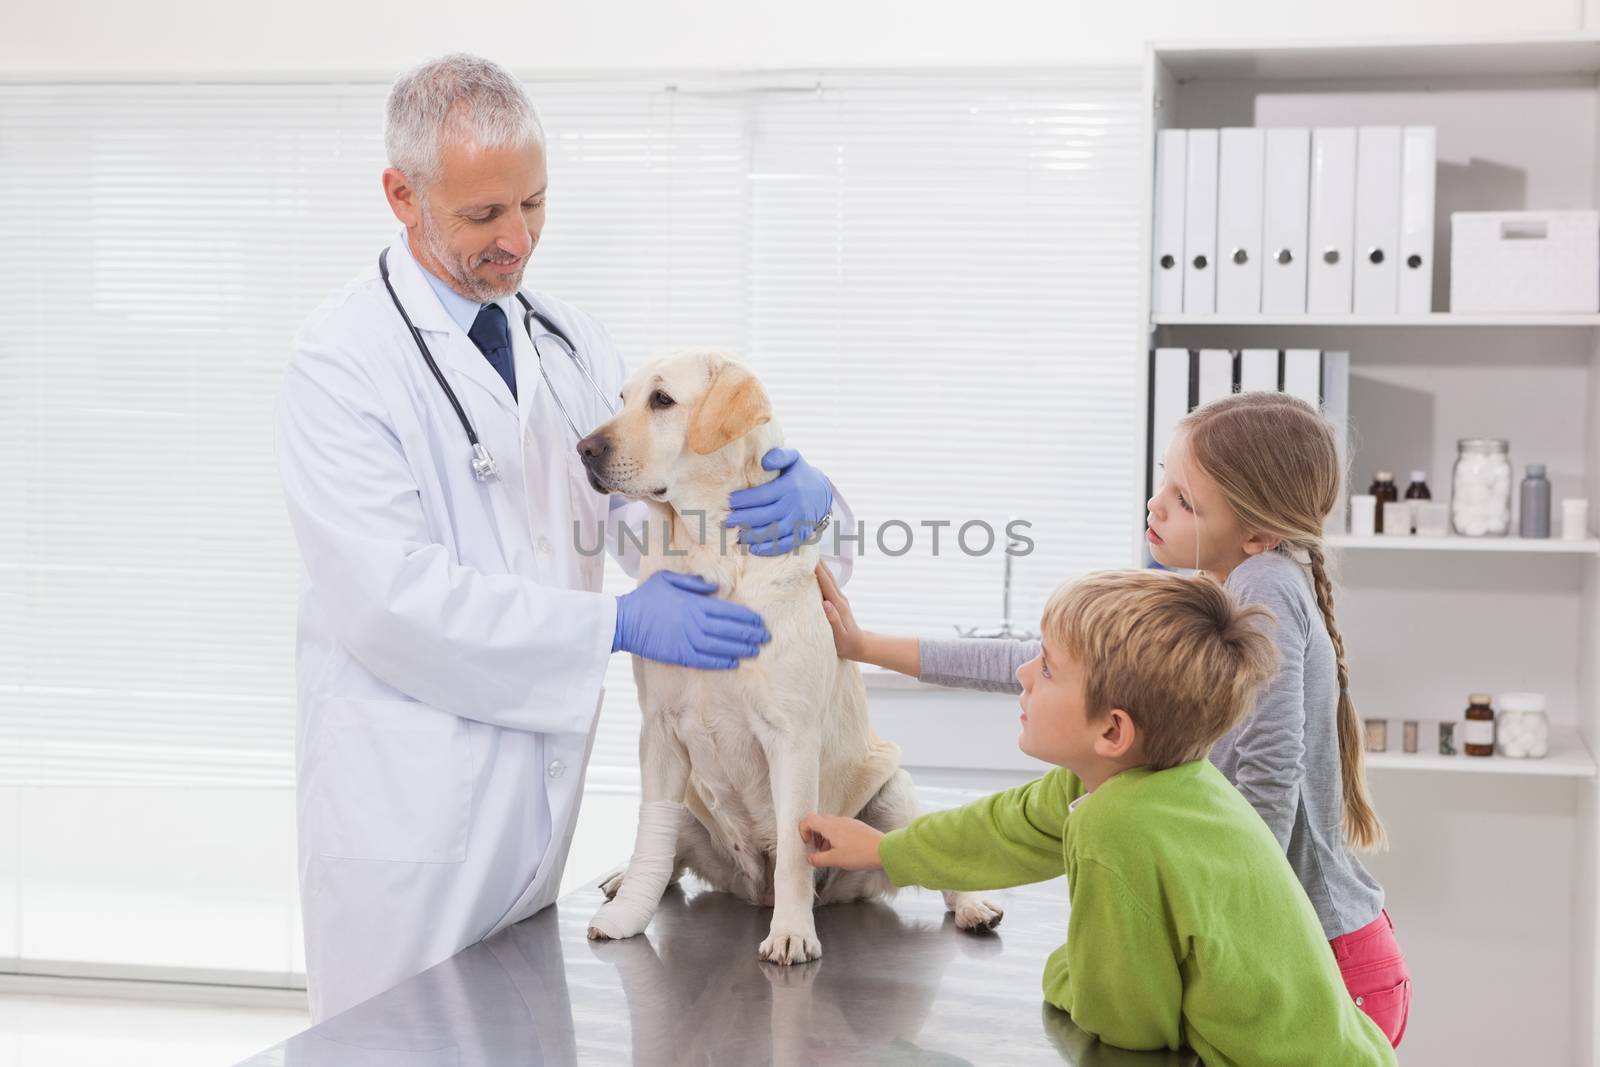 Vet examining a dog with its owners in medical office 